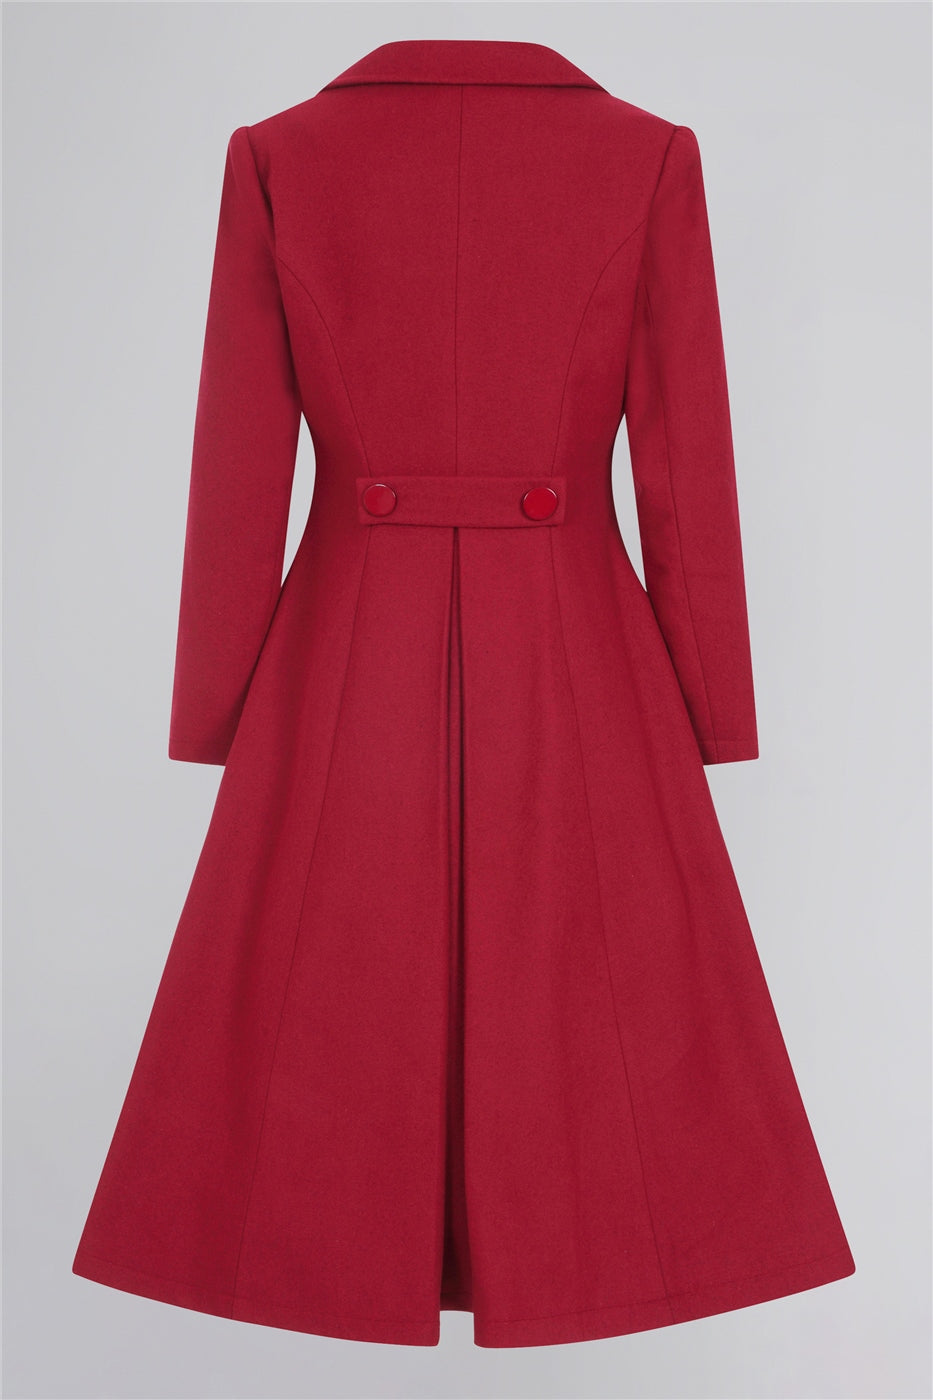 Burgundy 40s style coat from the back featuring two buttons and a pleat in the skirt